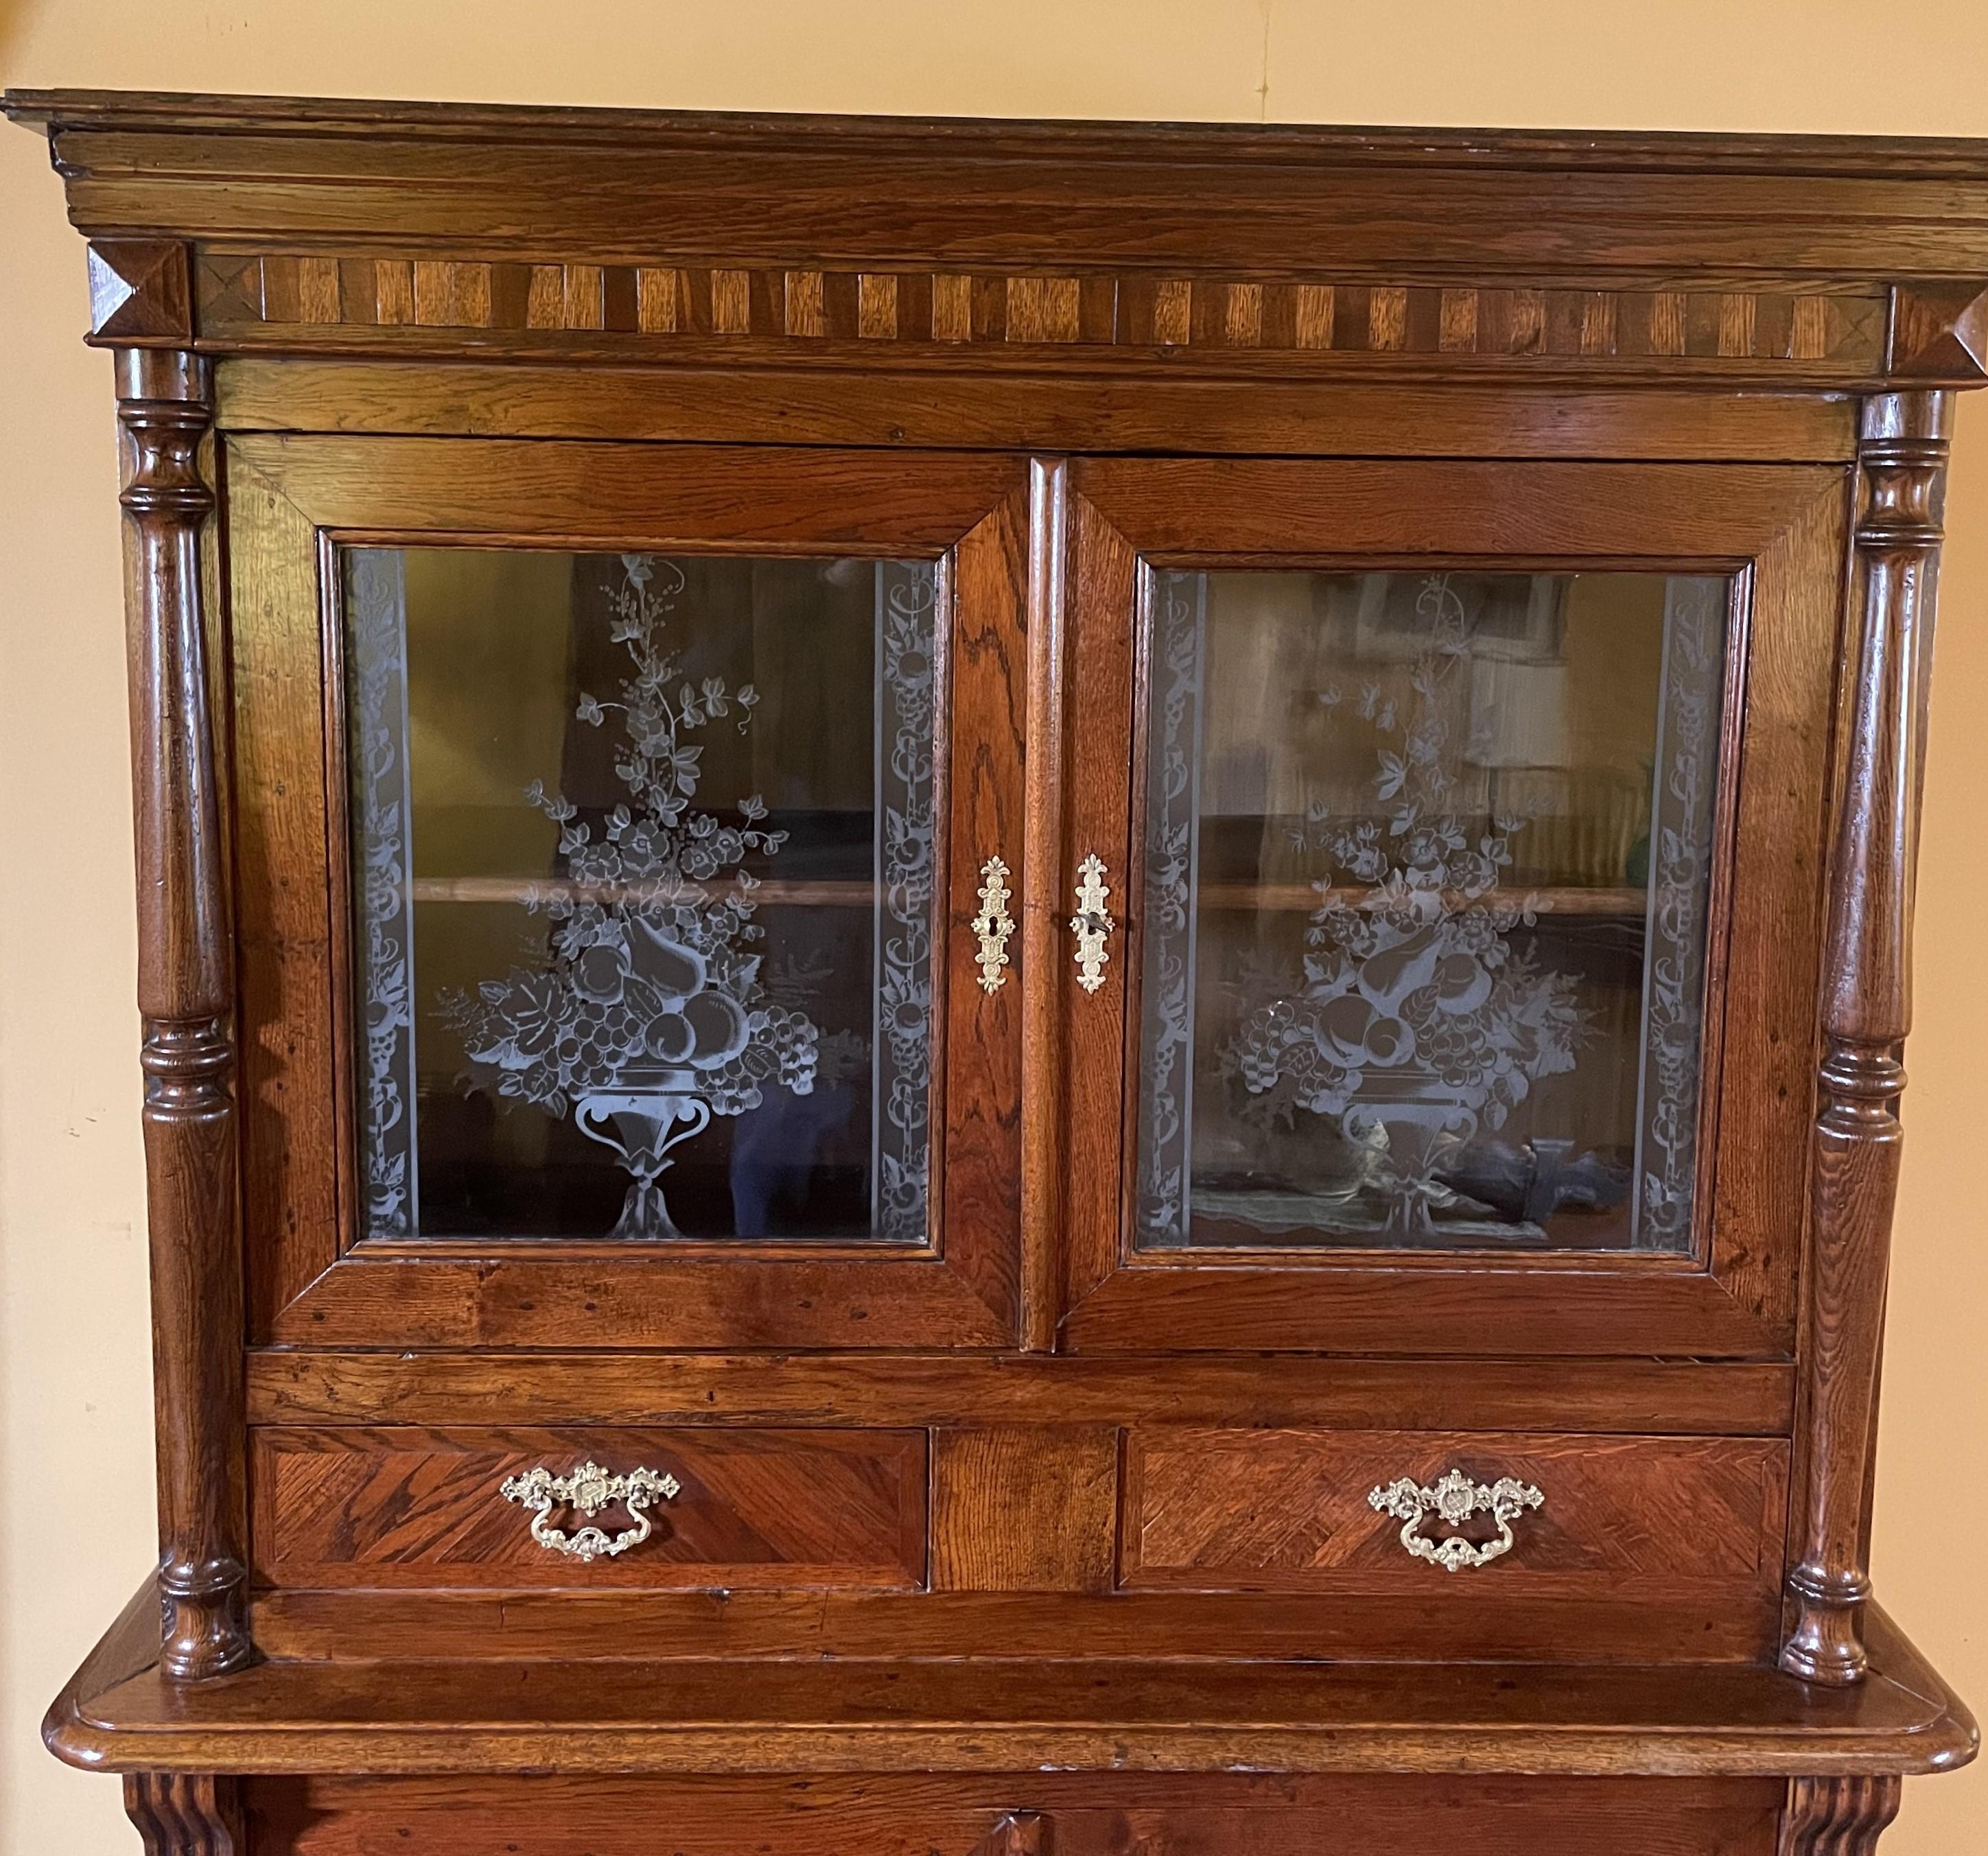 curious art nouveau oak dresser from the early 20th century from Brussels

Small model composed of 4 doors and two drawers with 2 glass doors
Very beautiful work on the windows with two engraved bouquets typical of the art-nouveau period

We can